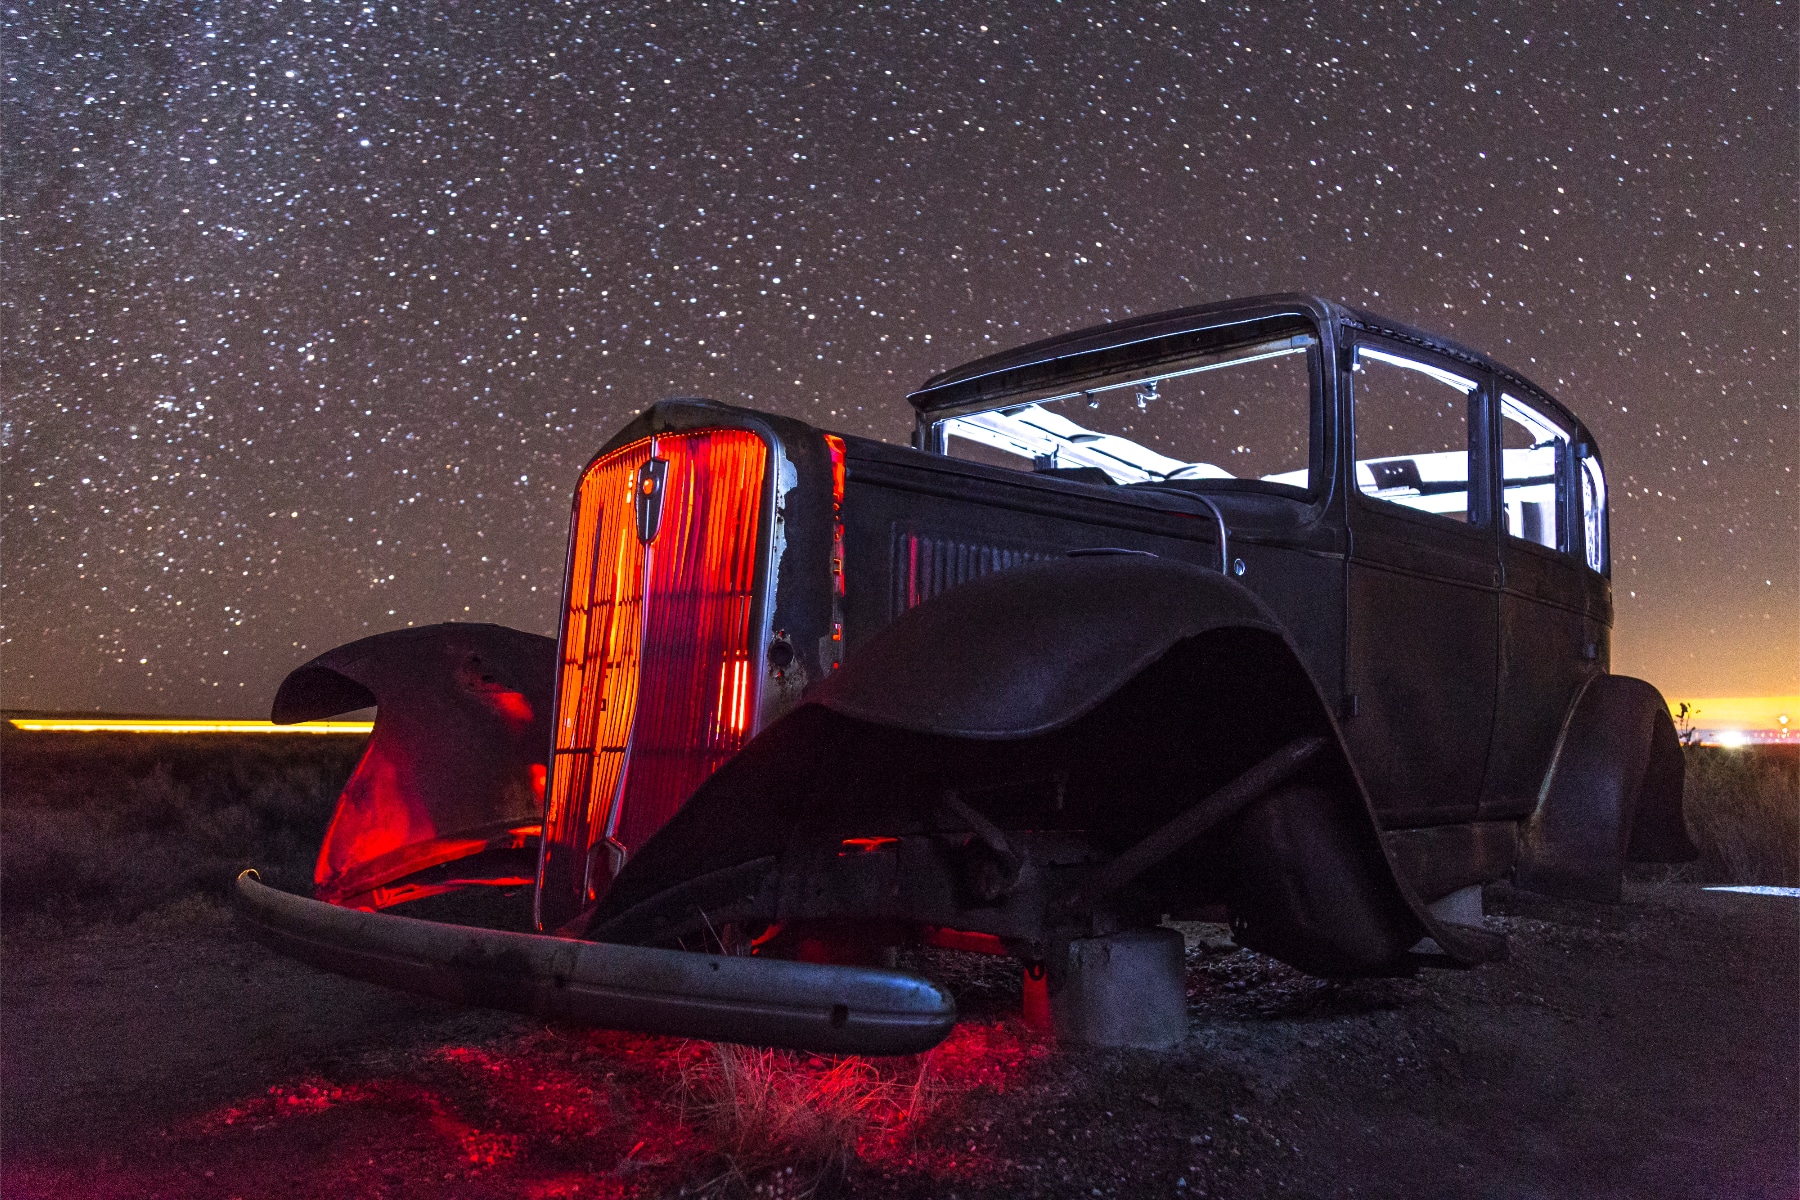 A broken down Studebaker glowing in the night skies of Petrified Forest National Park. 